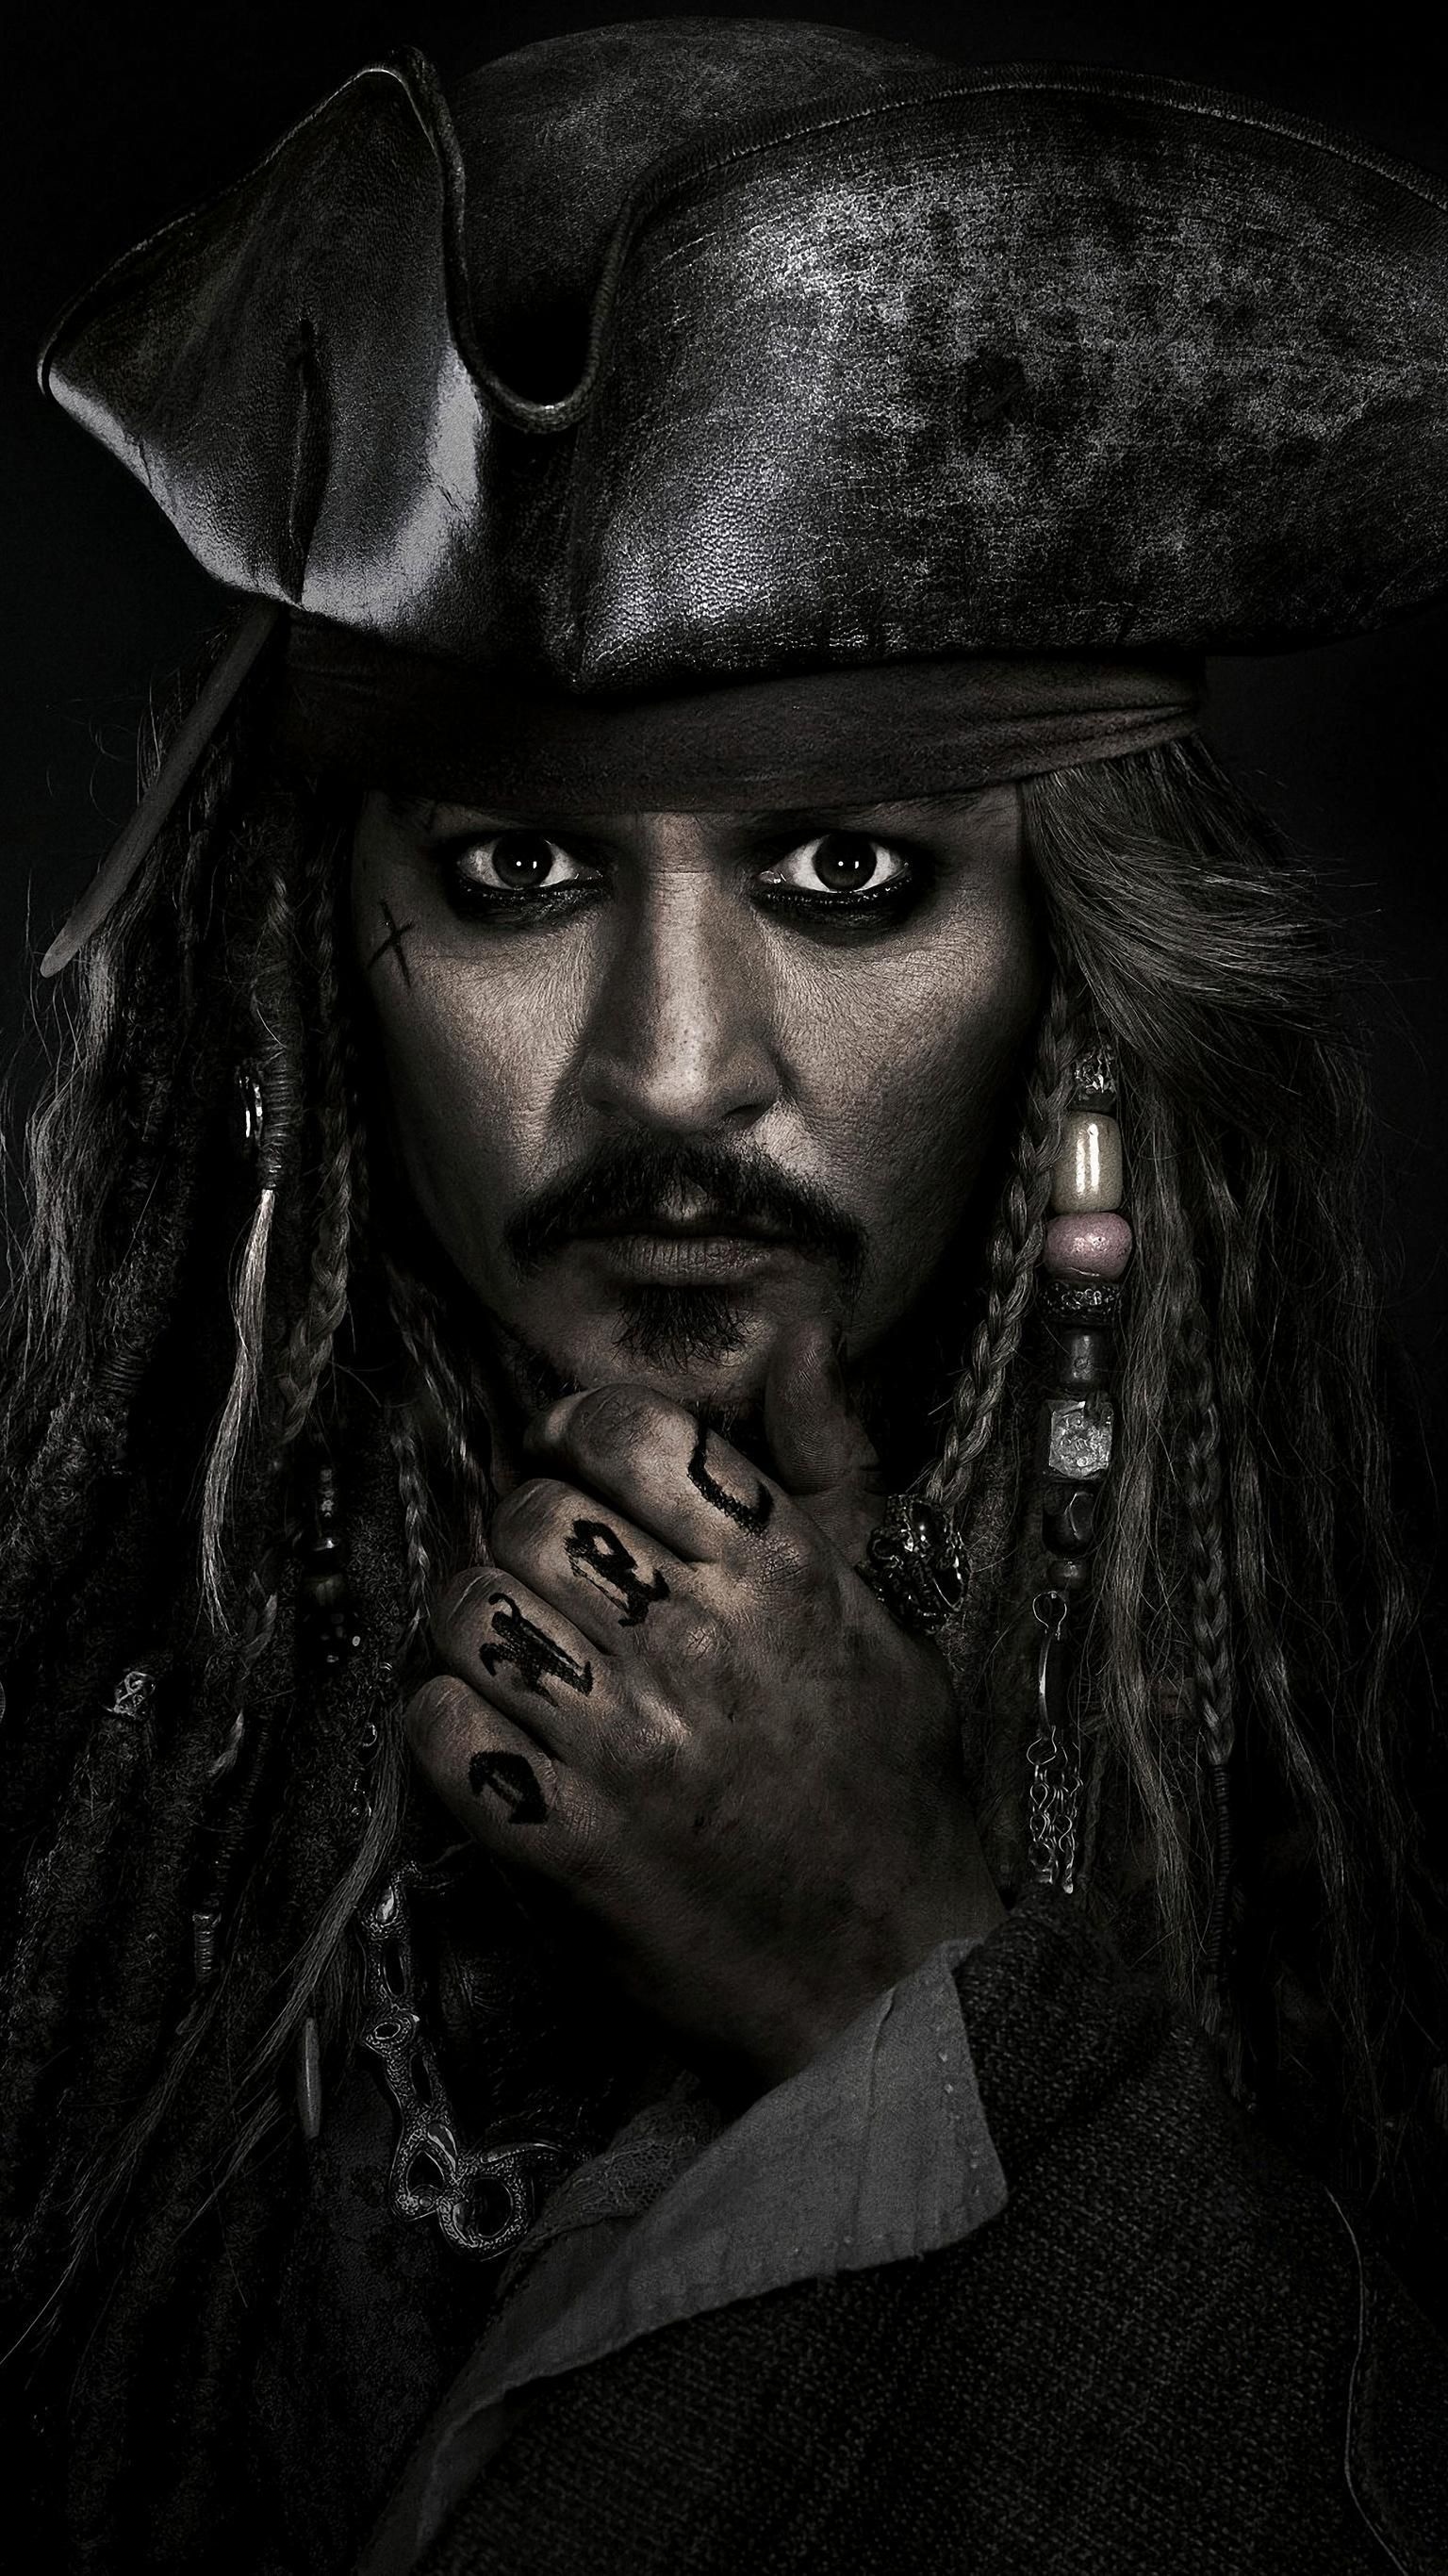 Pirates of the Caribbean: Pirate, Johnny Depp, received an Oscar nomination and much critical acclaim for his performance. 1540x2740 HD Wallpaper.